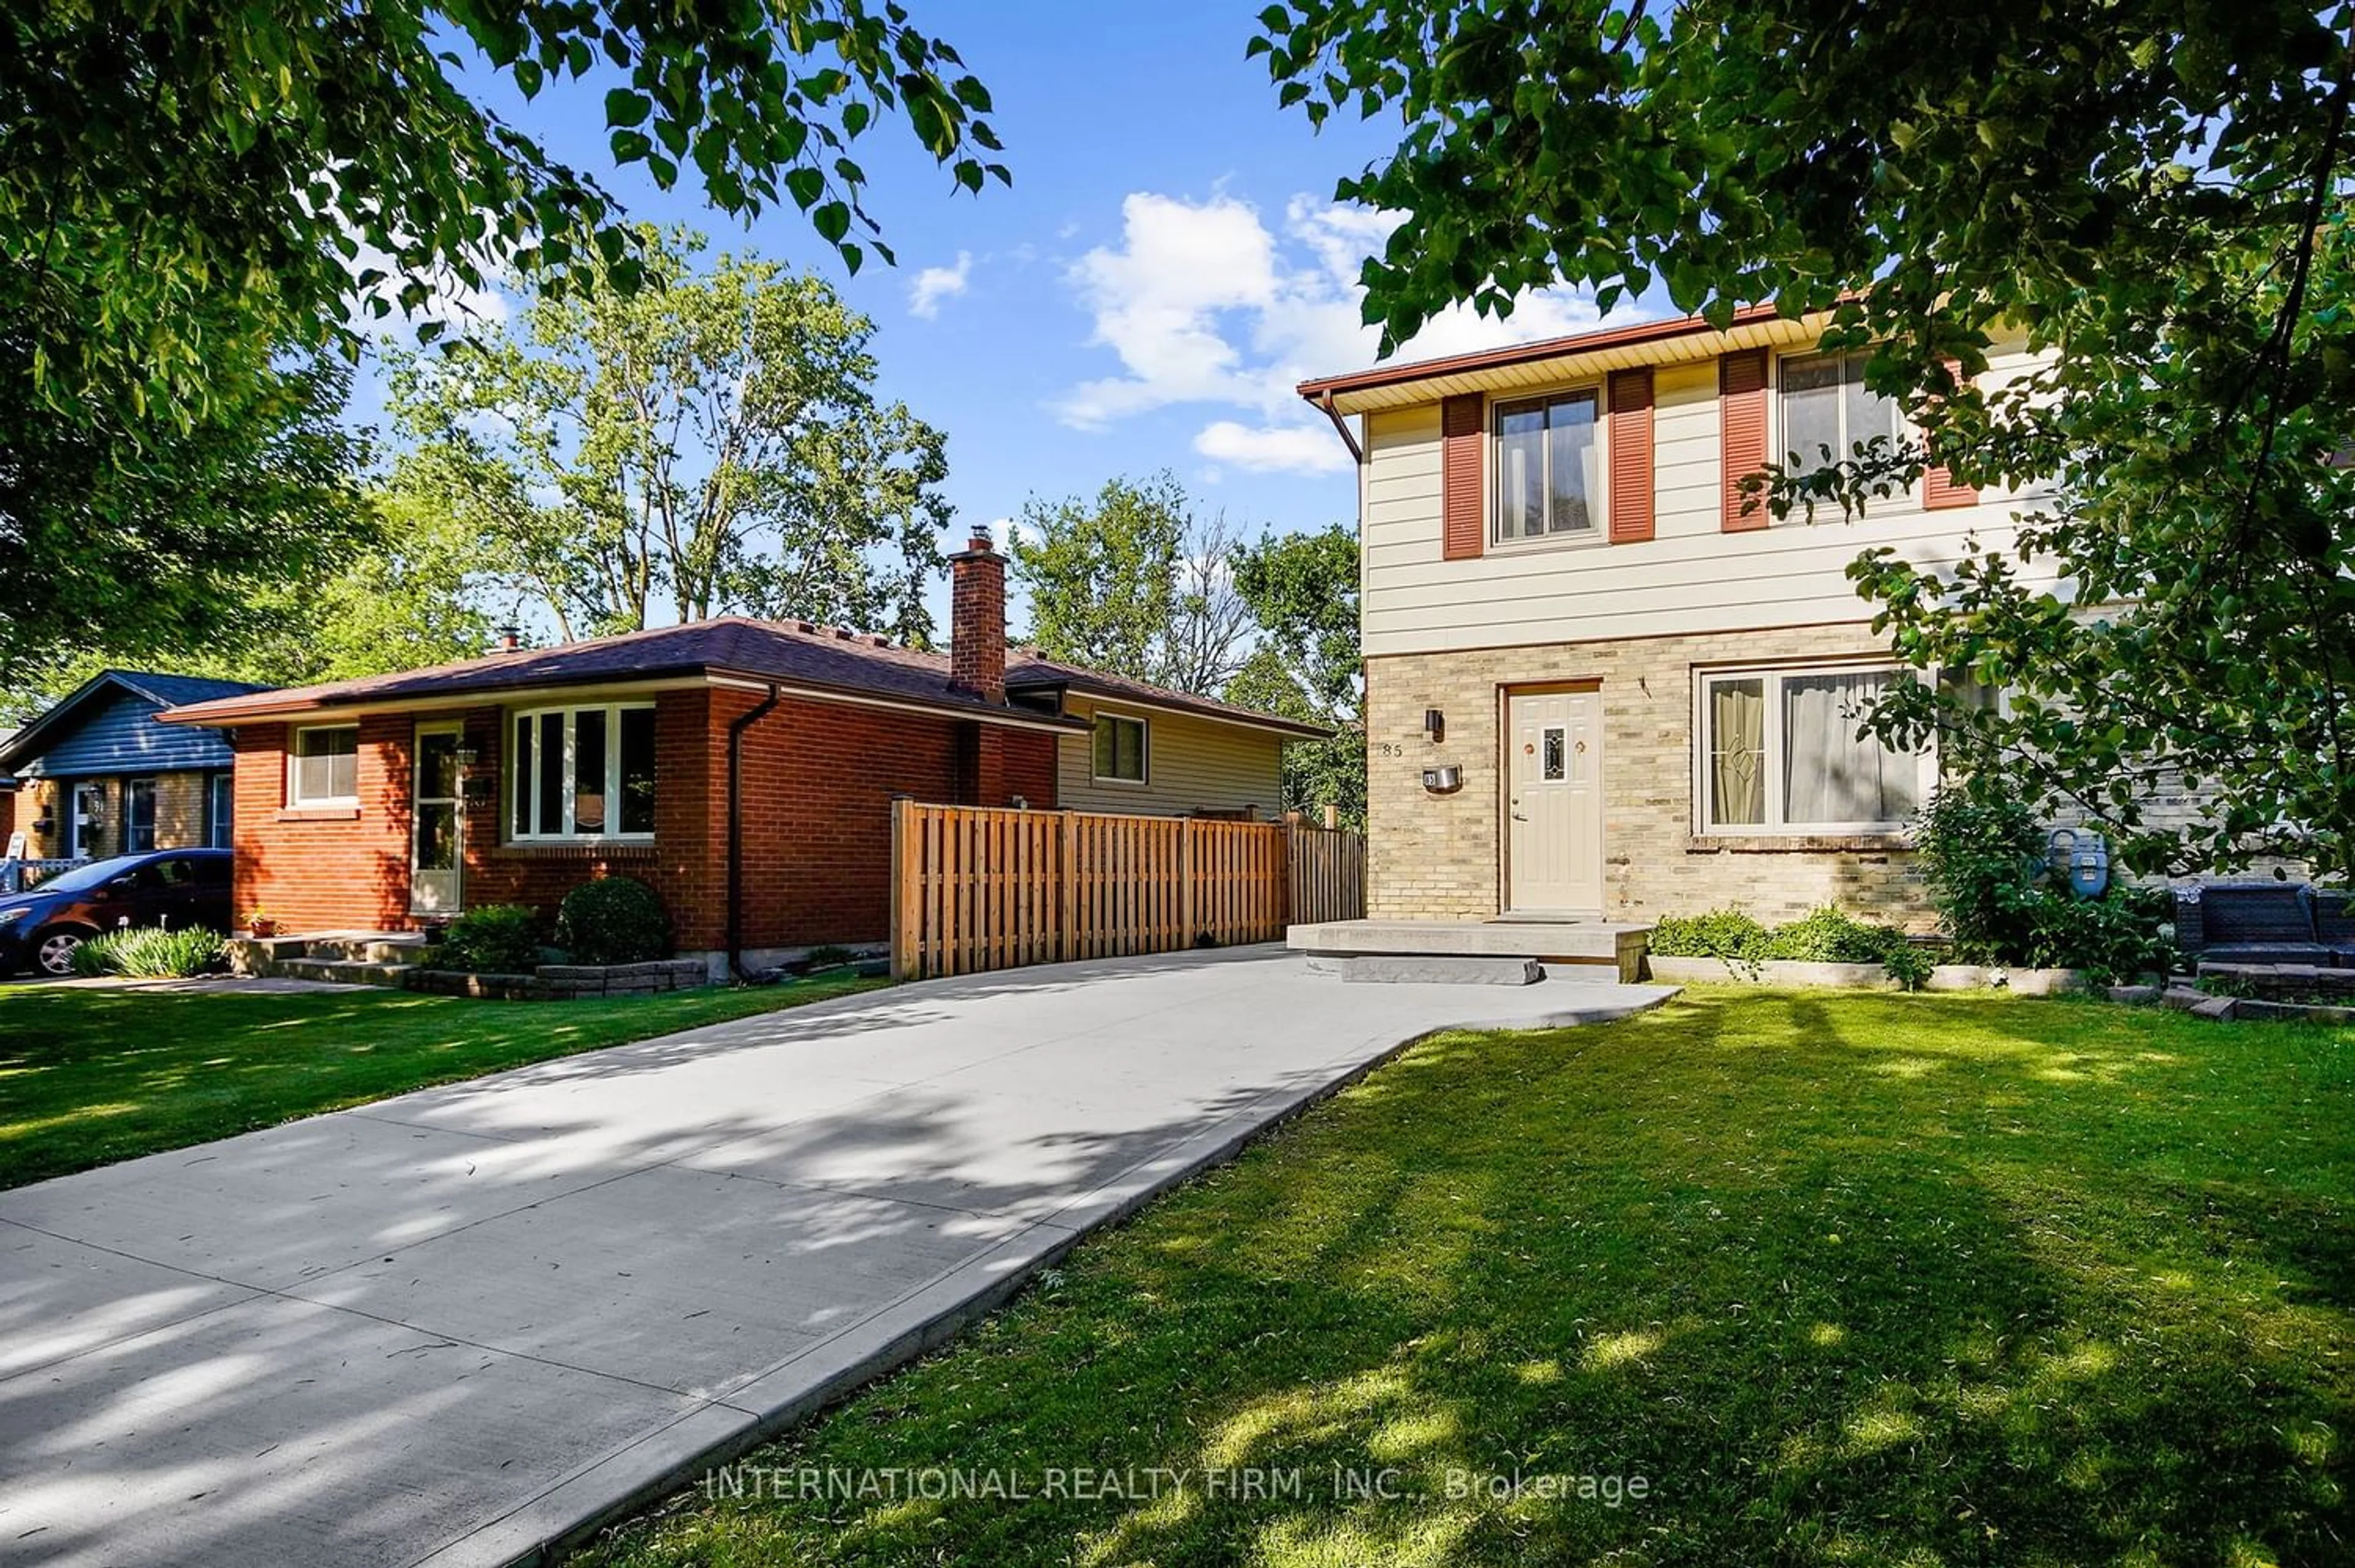 Home with brick exterior material for 85 Kintail Cres, London Ontario N6E 1J4